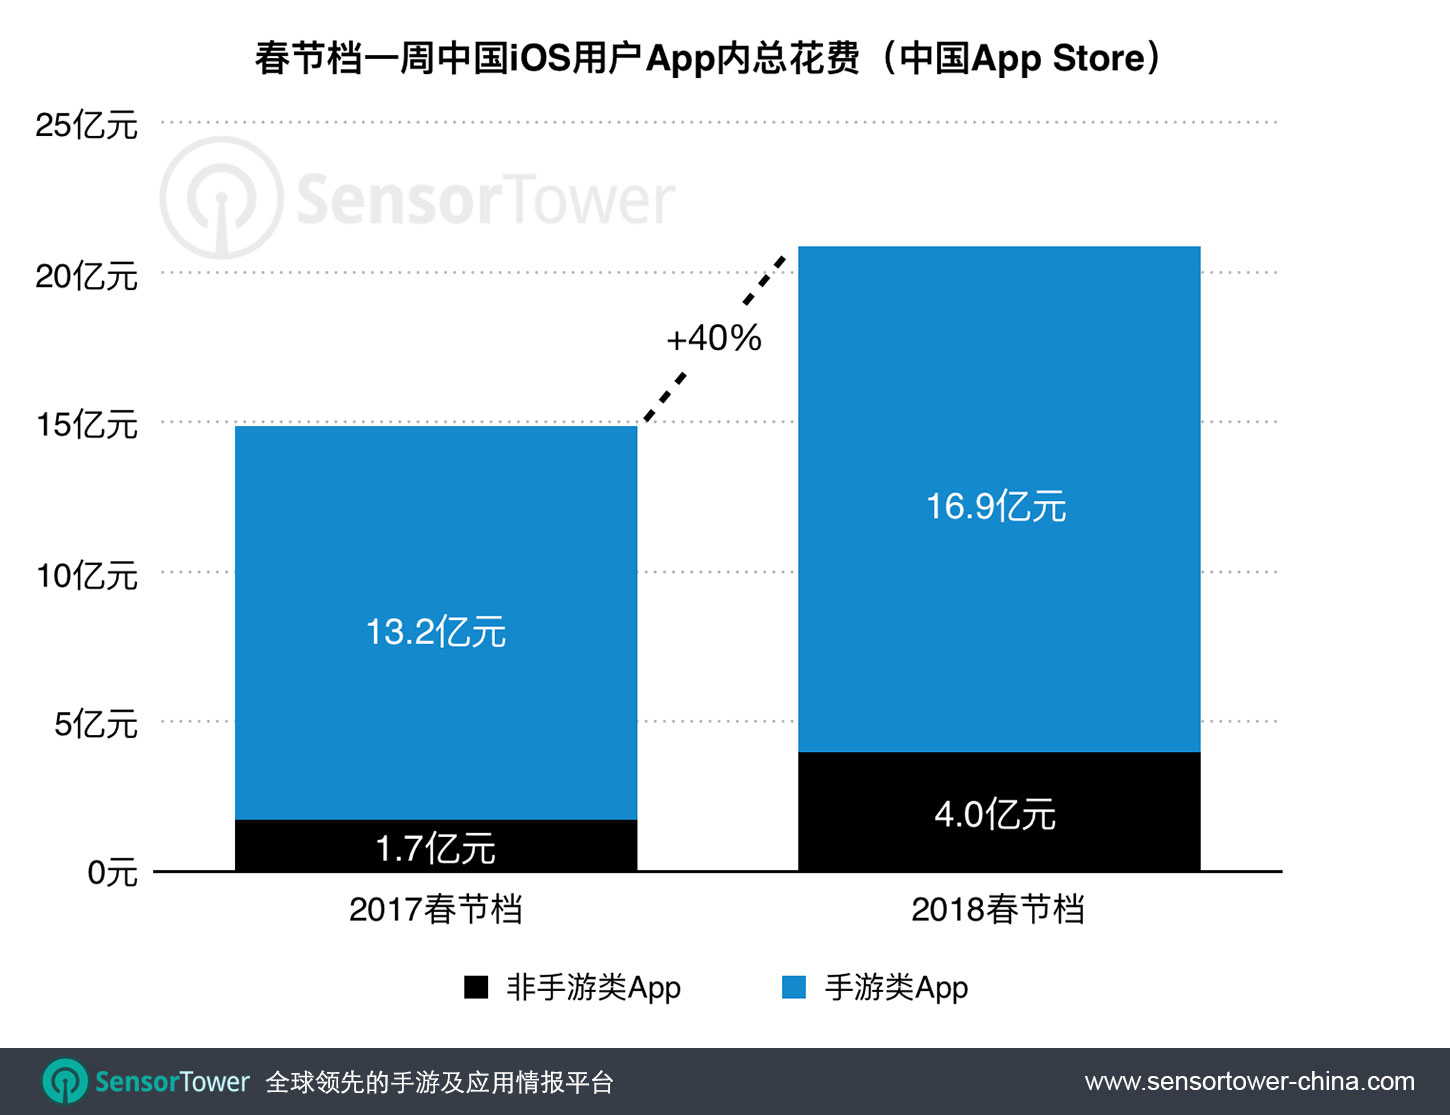 2018 Chinese New Year App Store Revenue